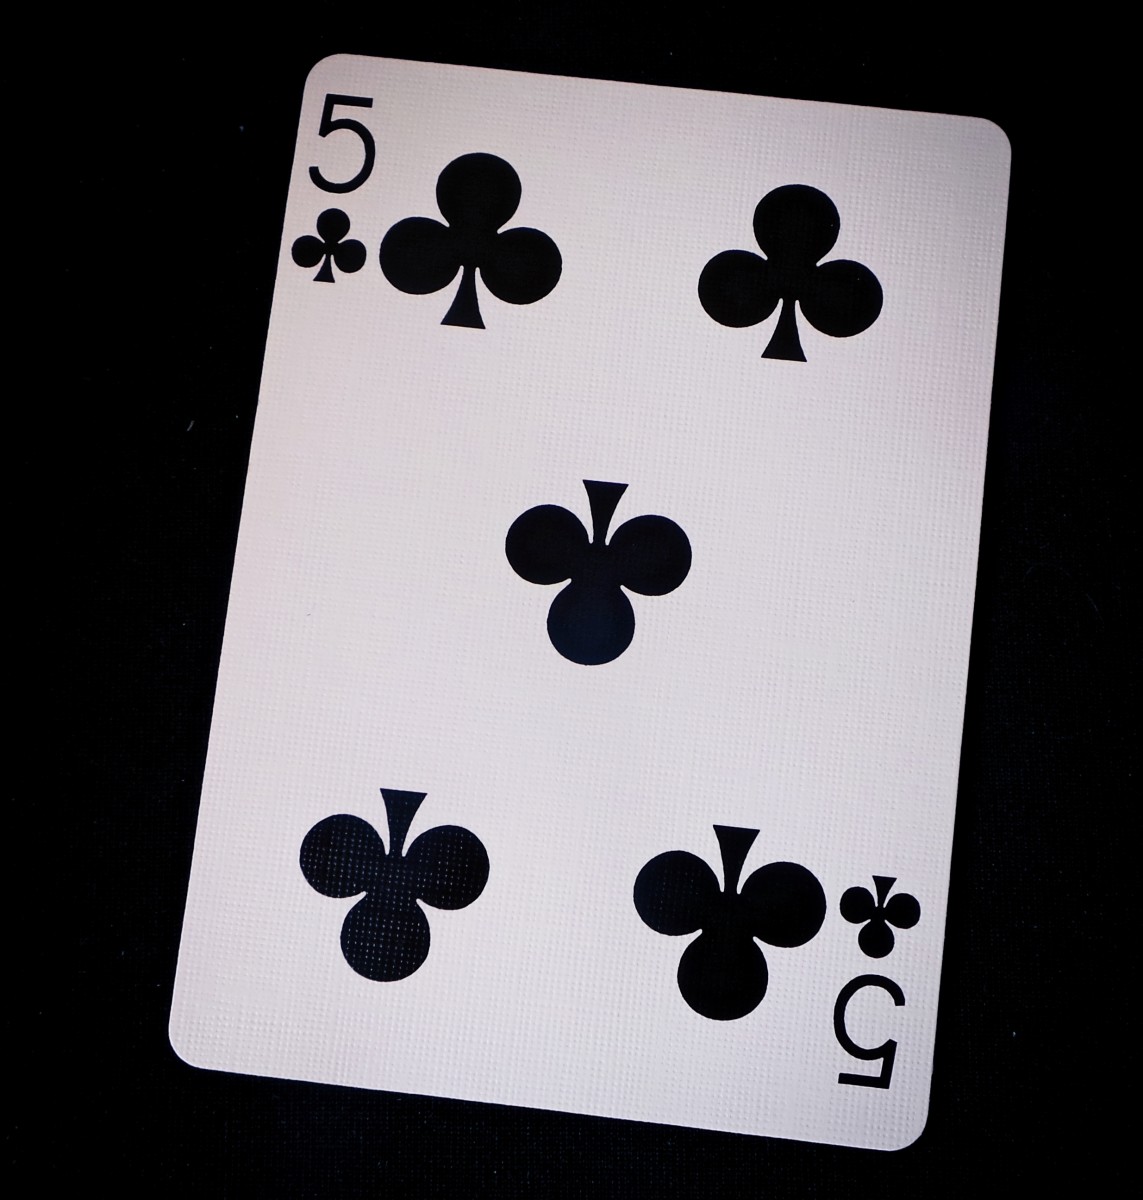 Because it is black, the 5 of clubs means no. 